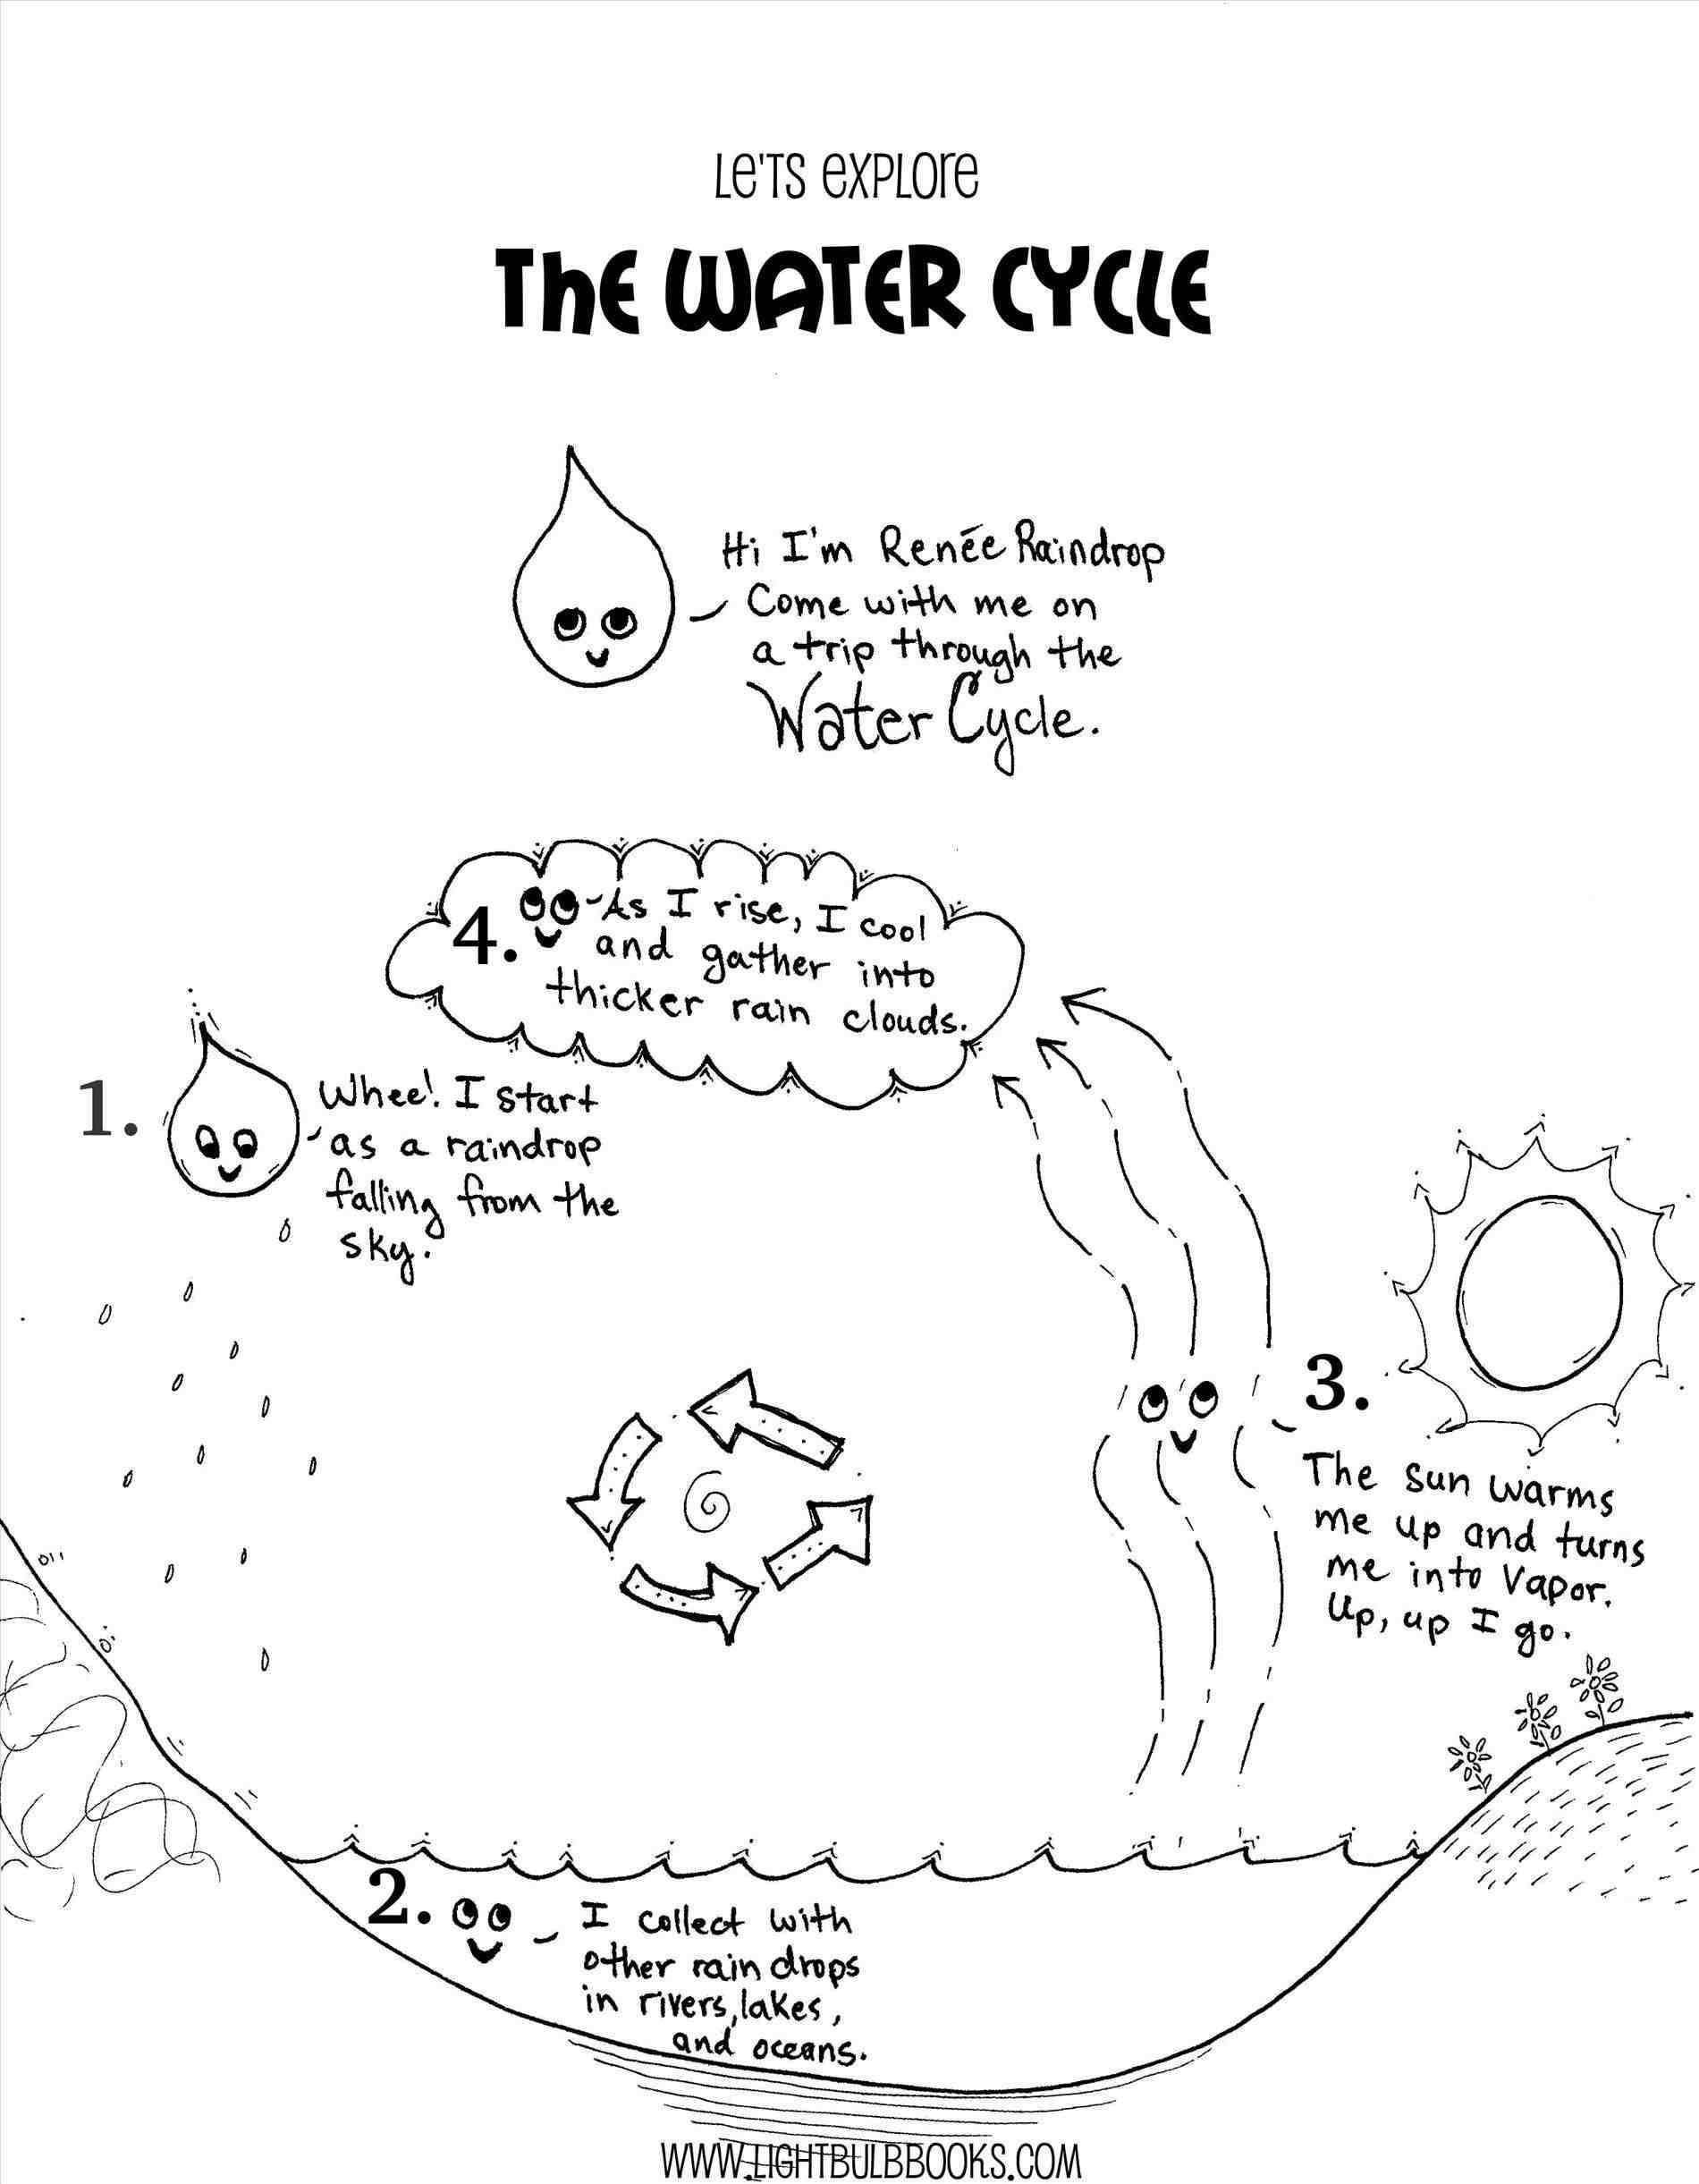 Rock Cycle Diagram Worksheet the Water Cycle Worksheet Answer Key and Water Cycle